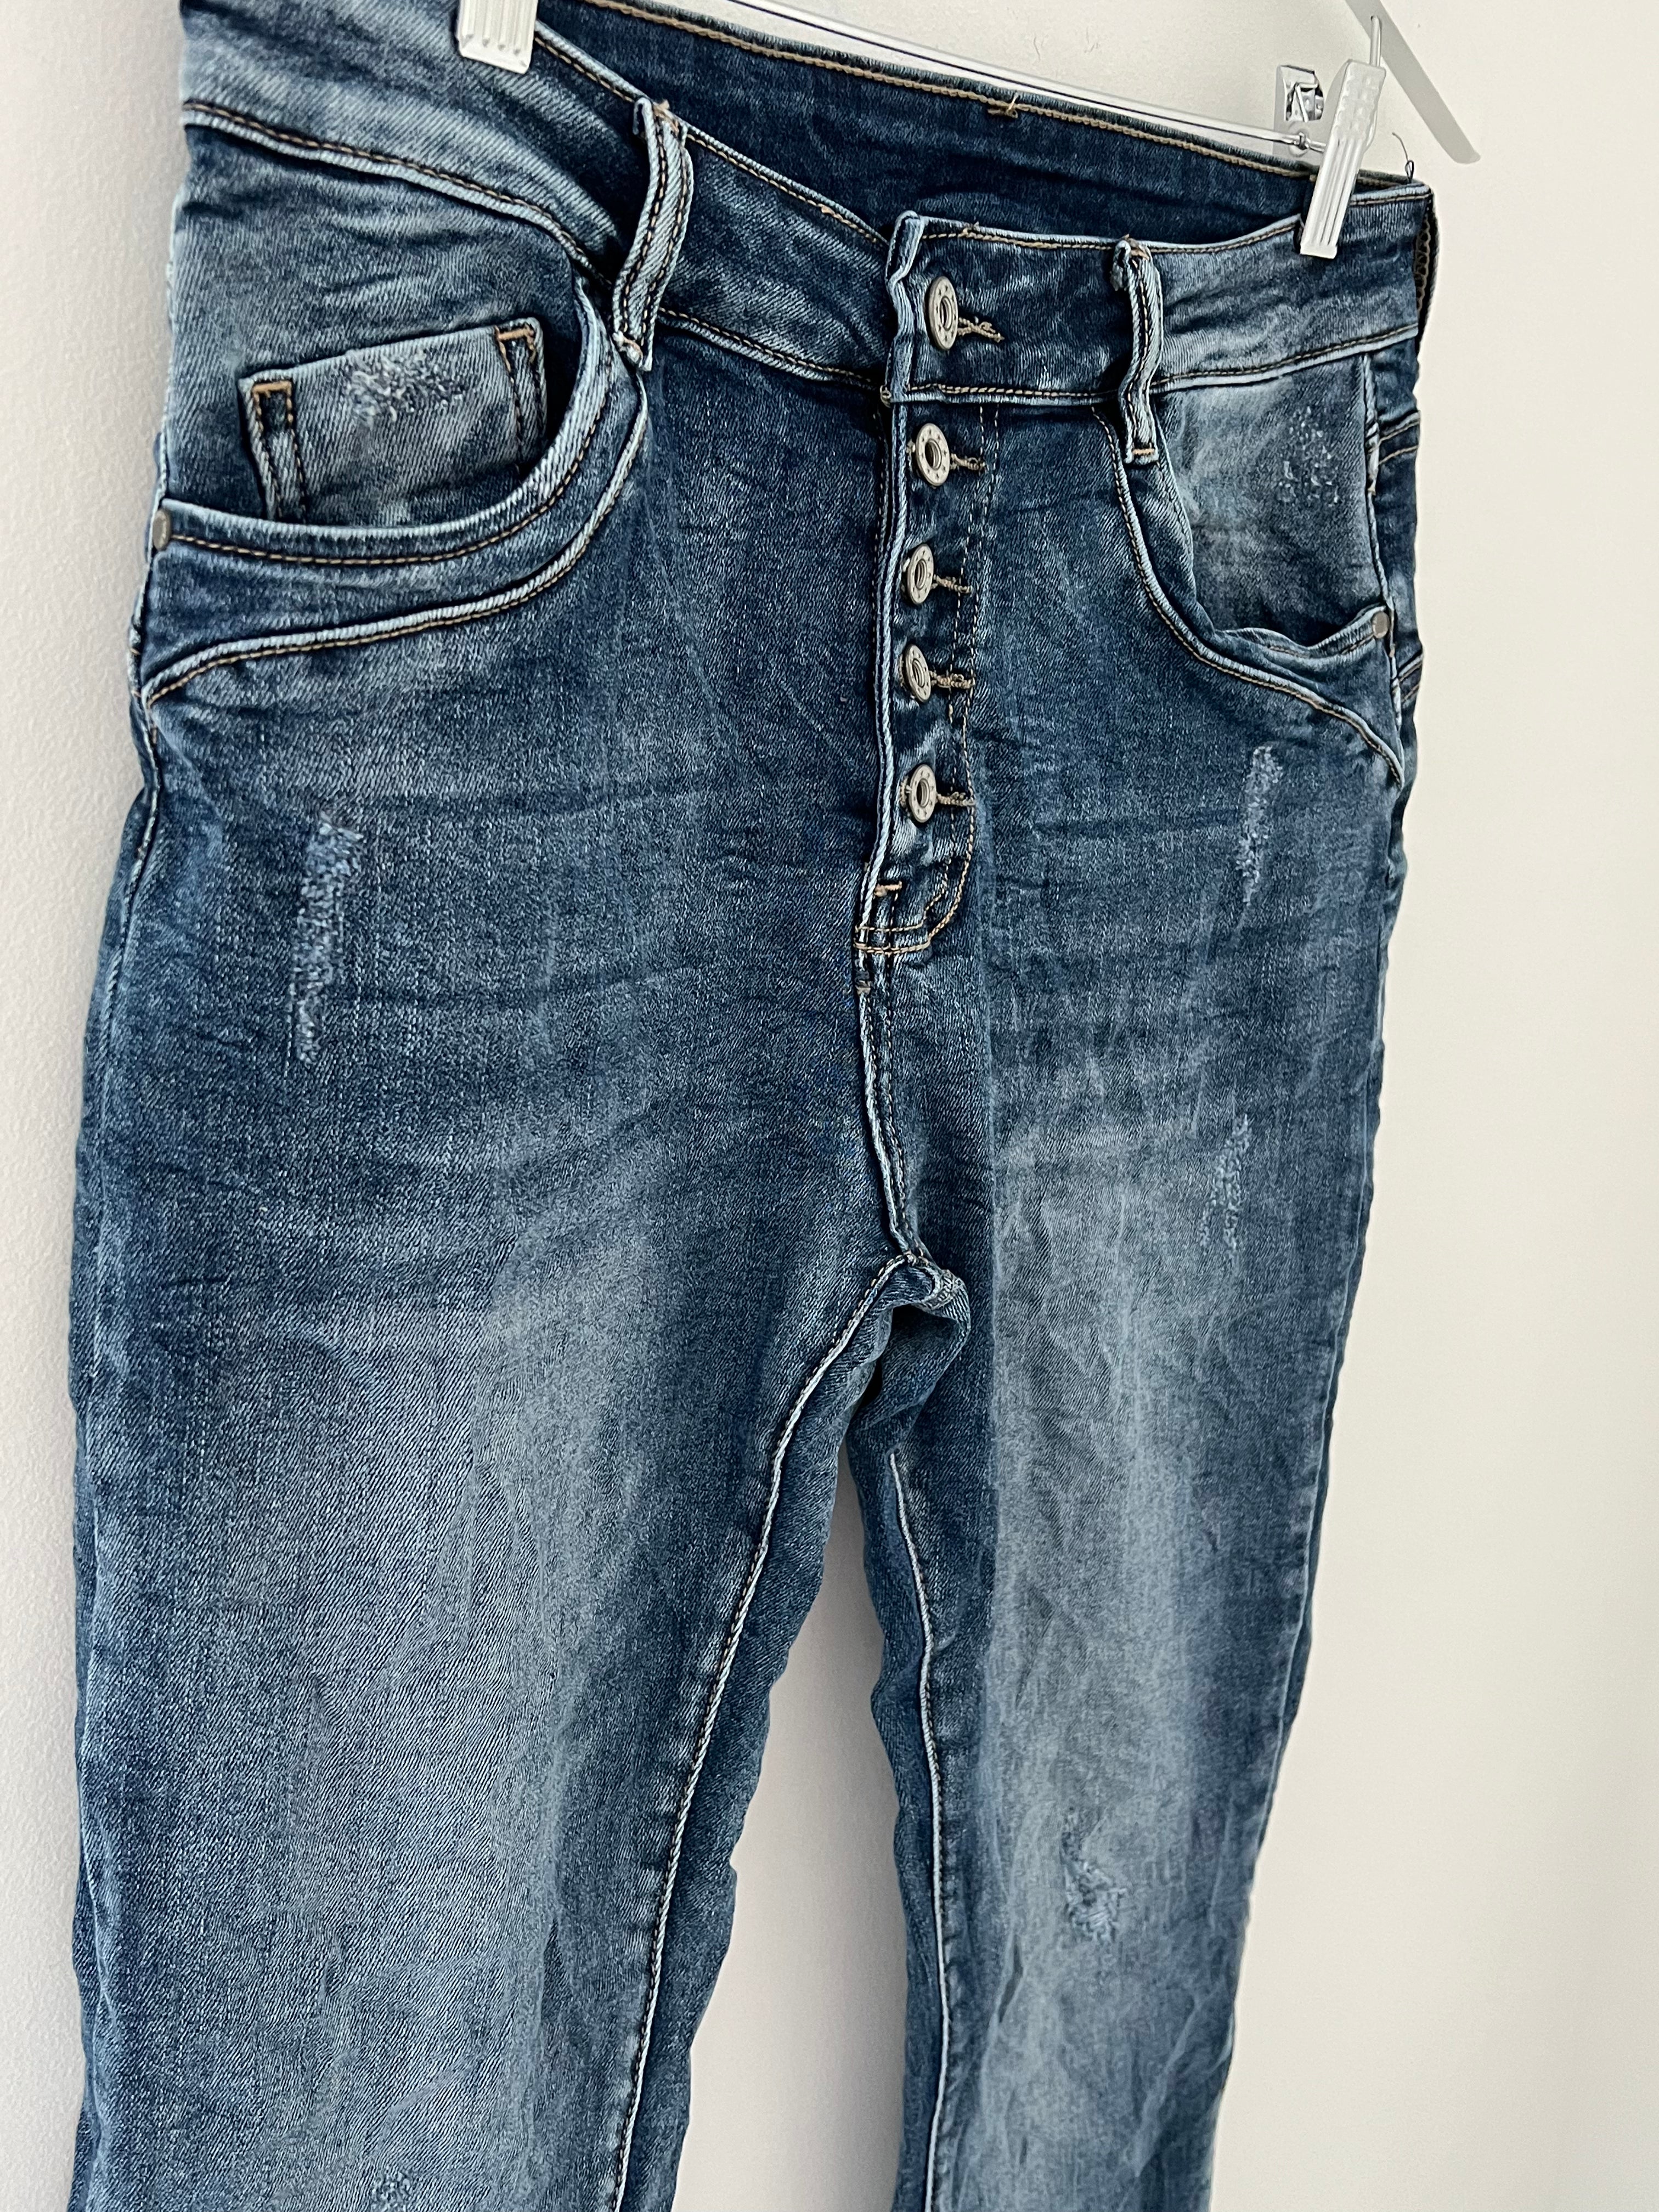 Button Fly Stretch Jeans in Mid Denim